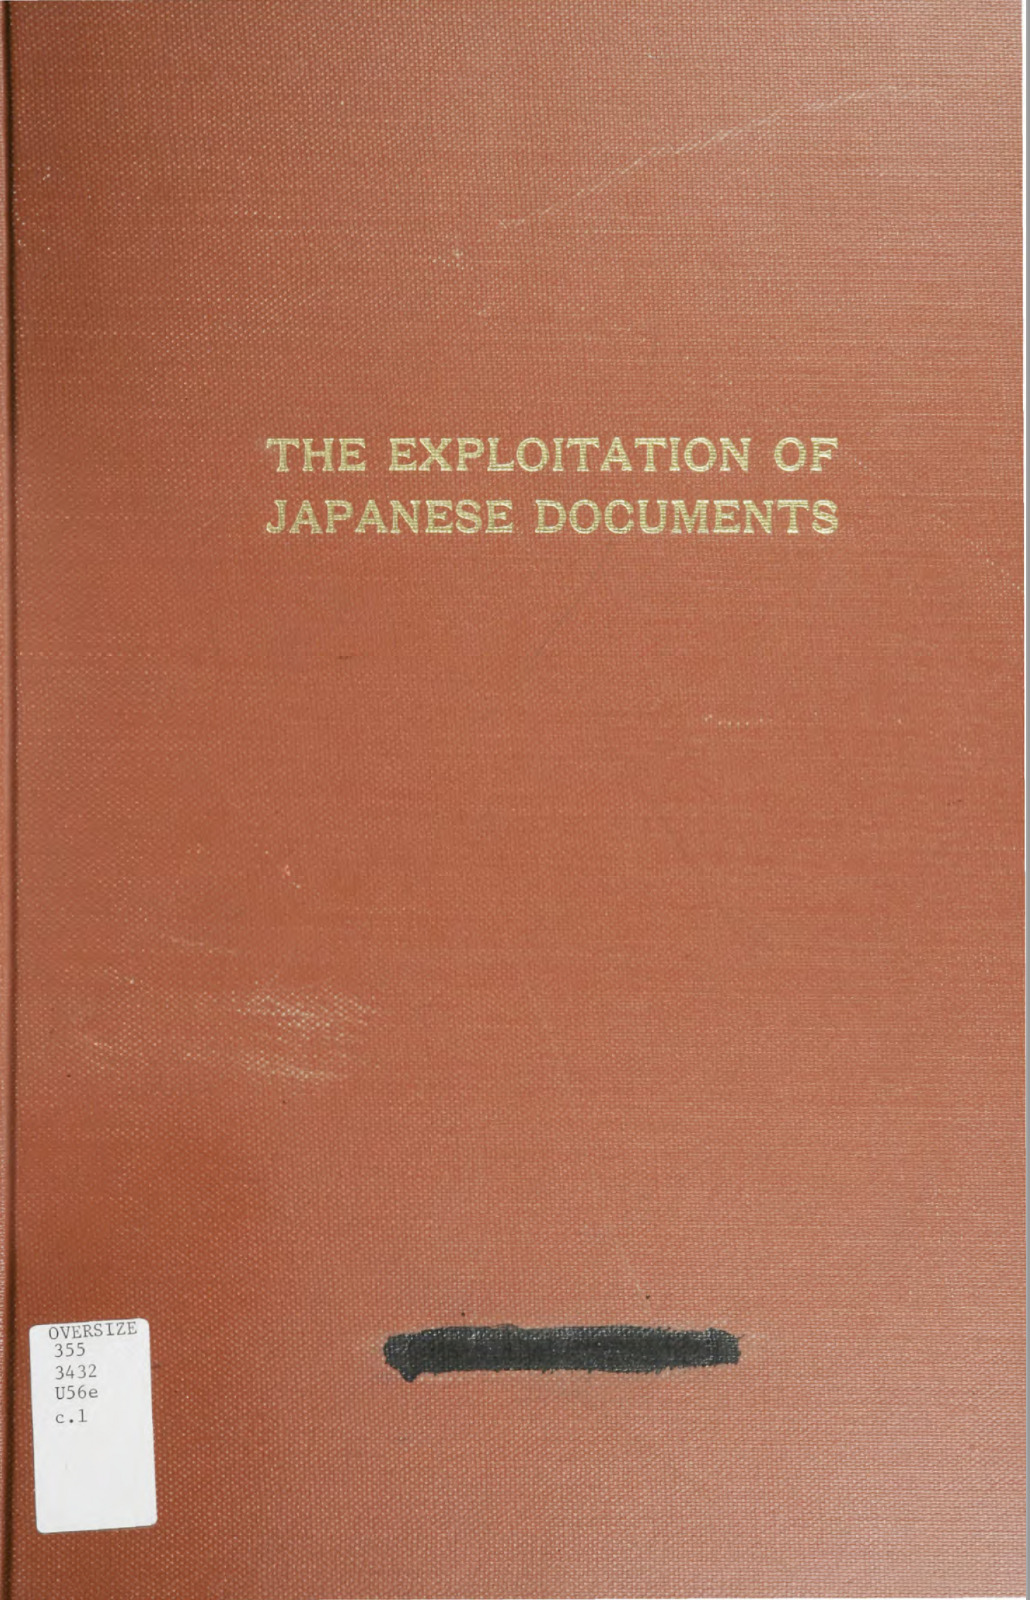 81 Page 1944 EXPLOITATION OF JAPANESE DOCUMENTS WWII War Department Book on CD